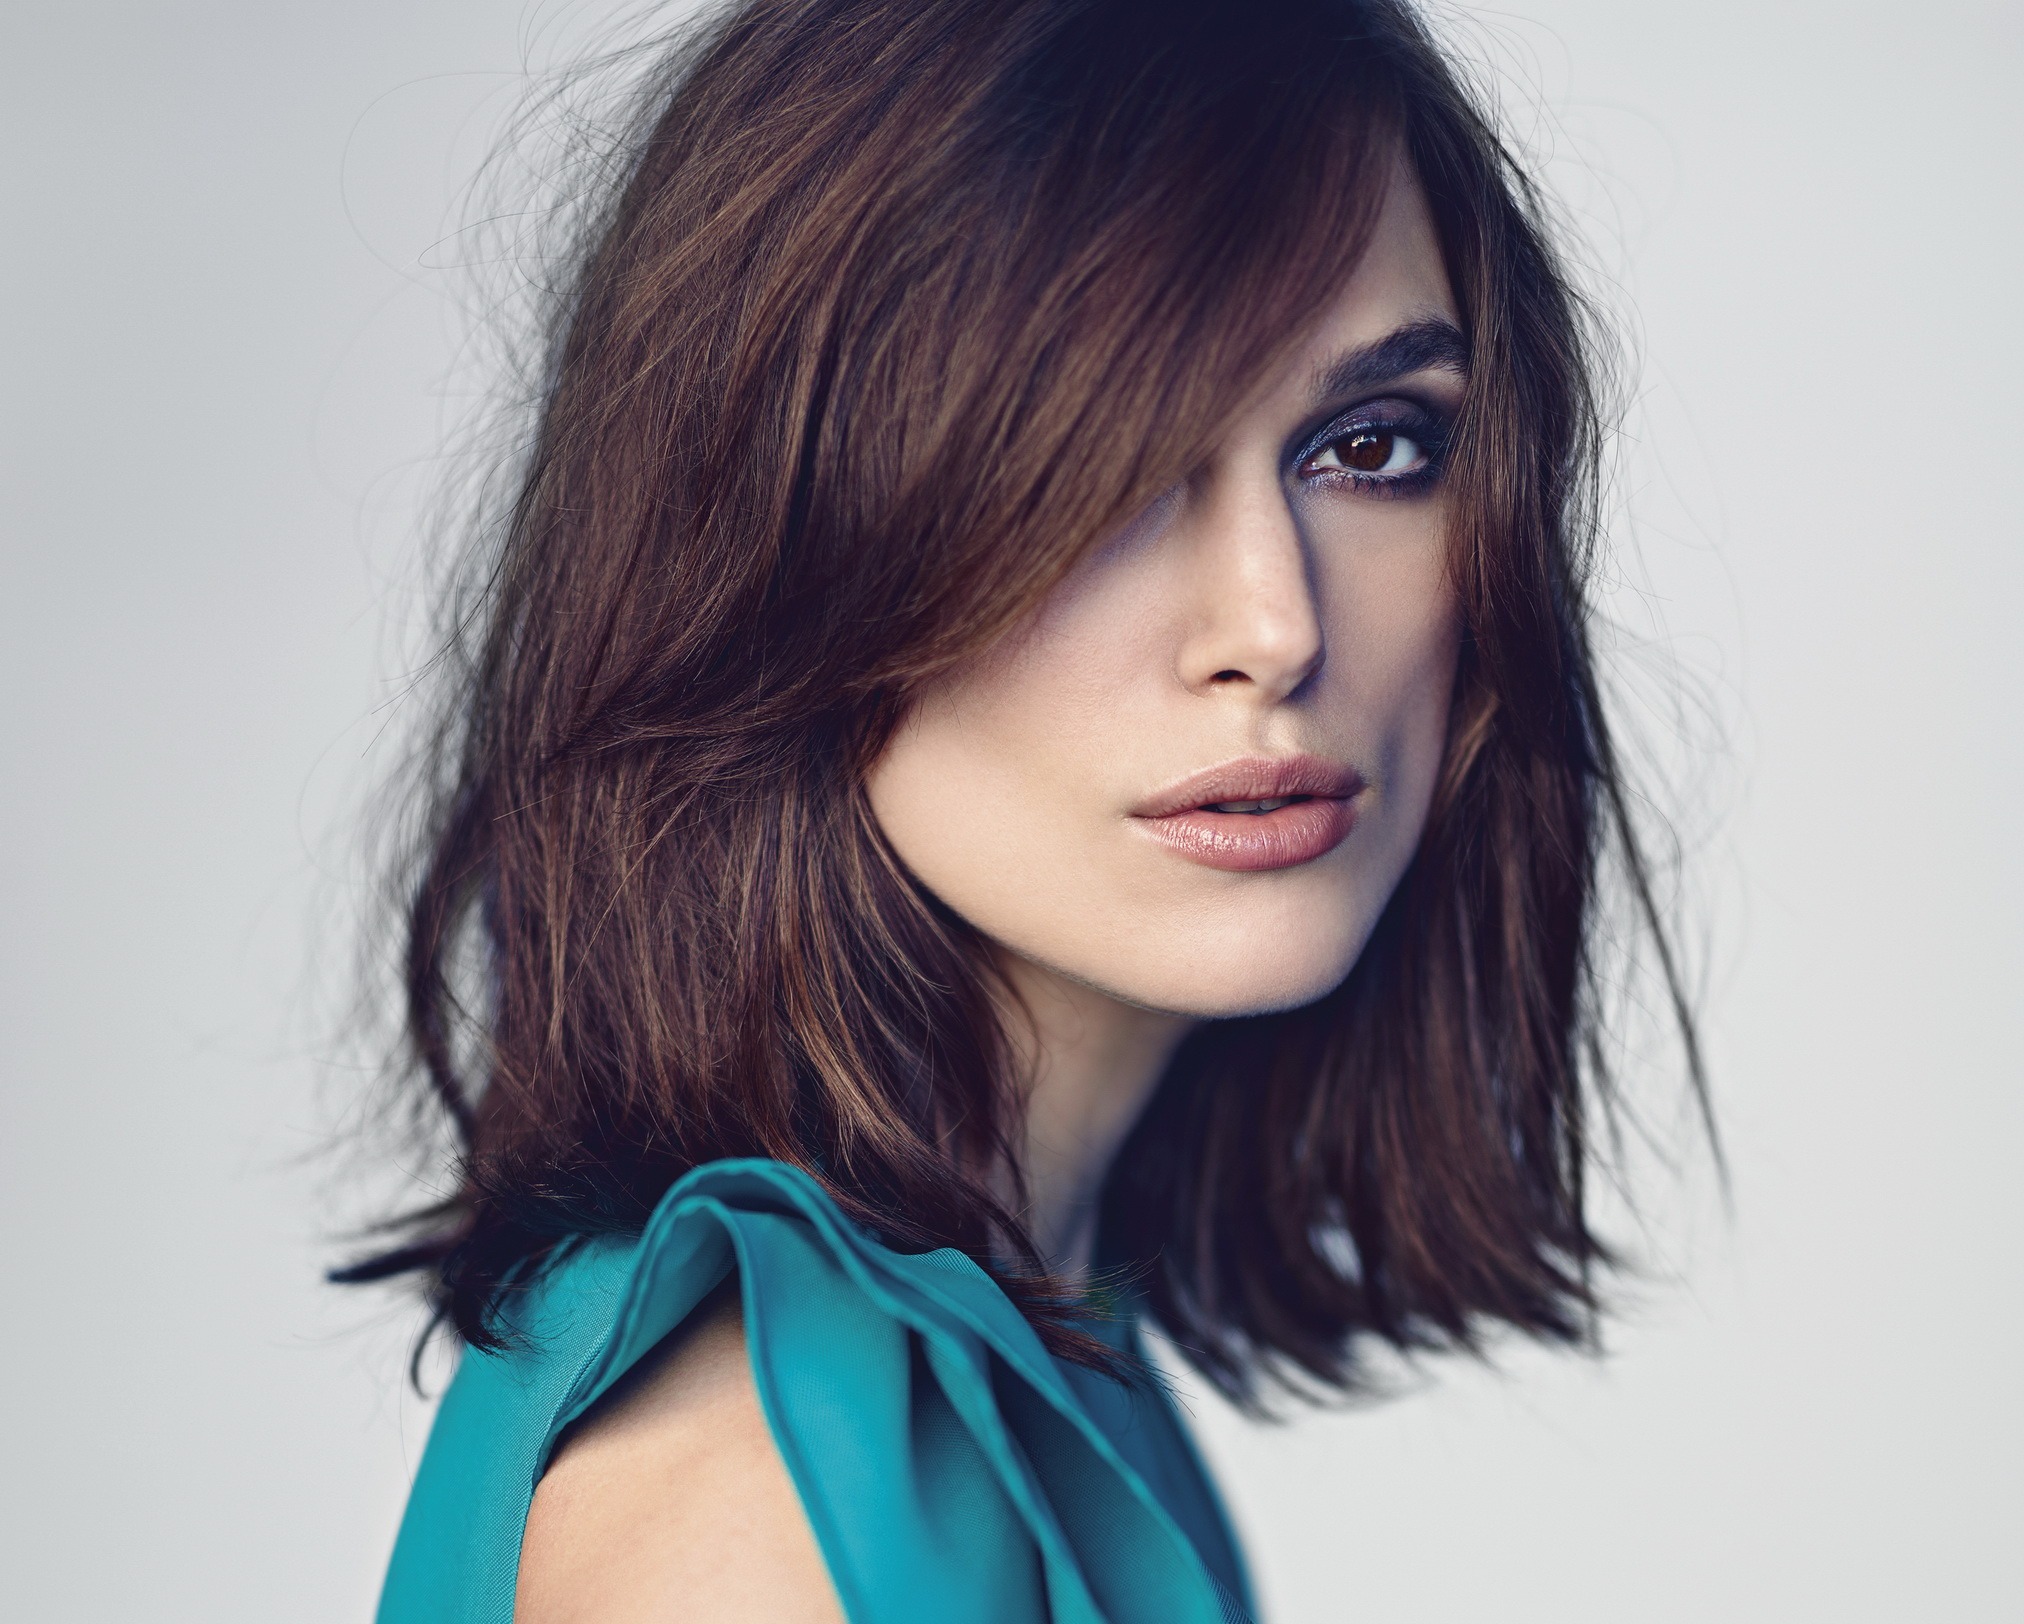 english, celebrity, keira knightley, actress, brown eyes, brunette, face phone background